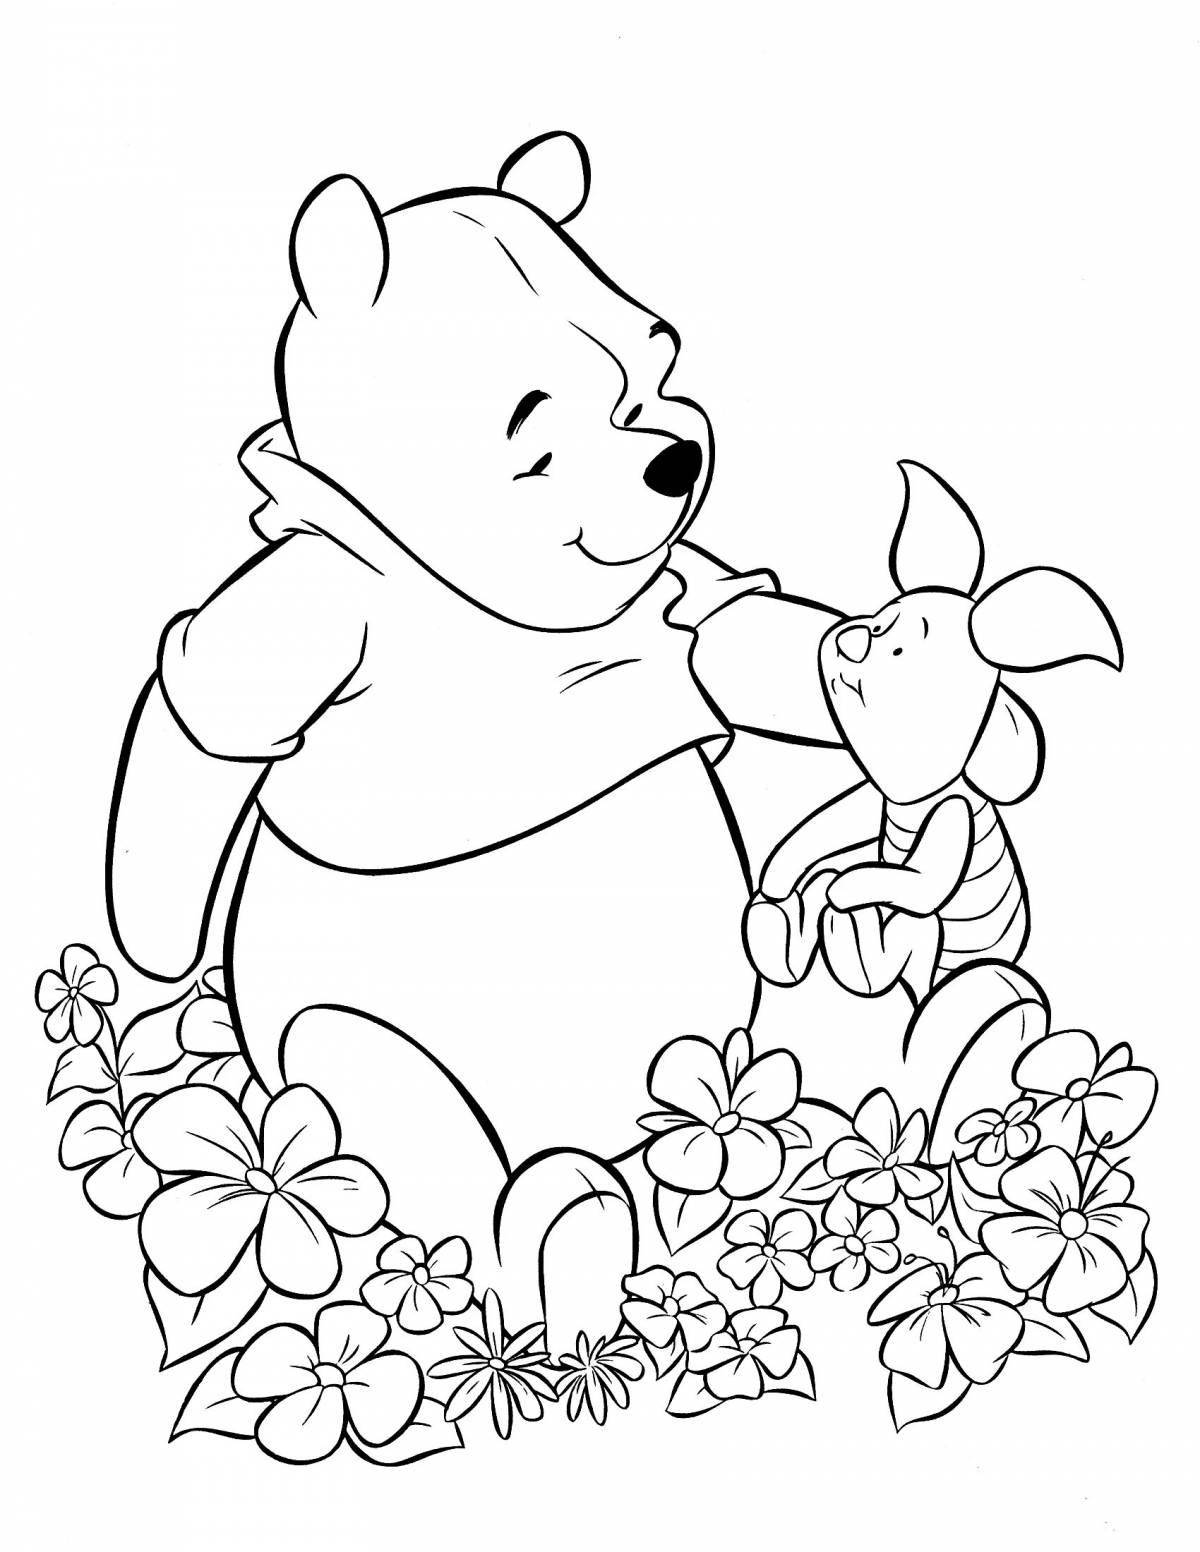 Outstanding winnie the pooh coloring book